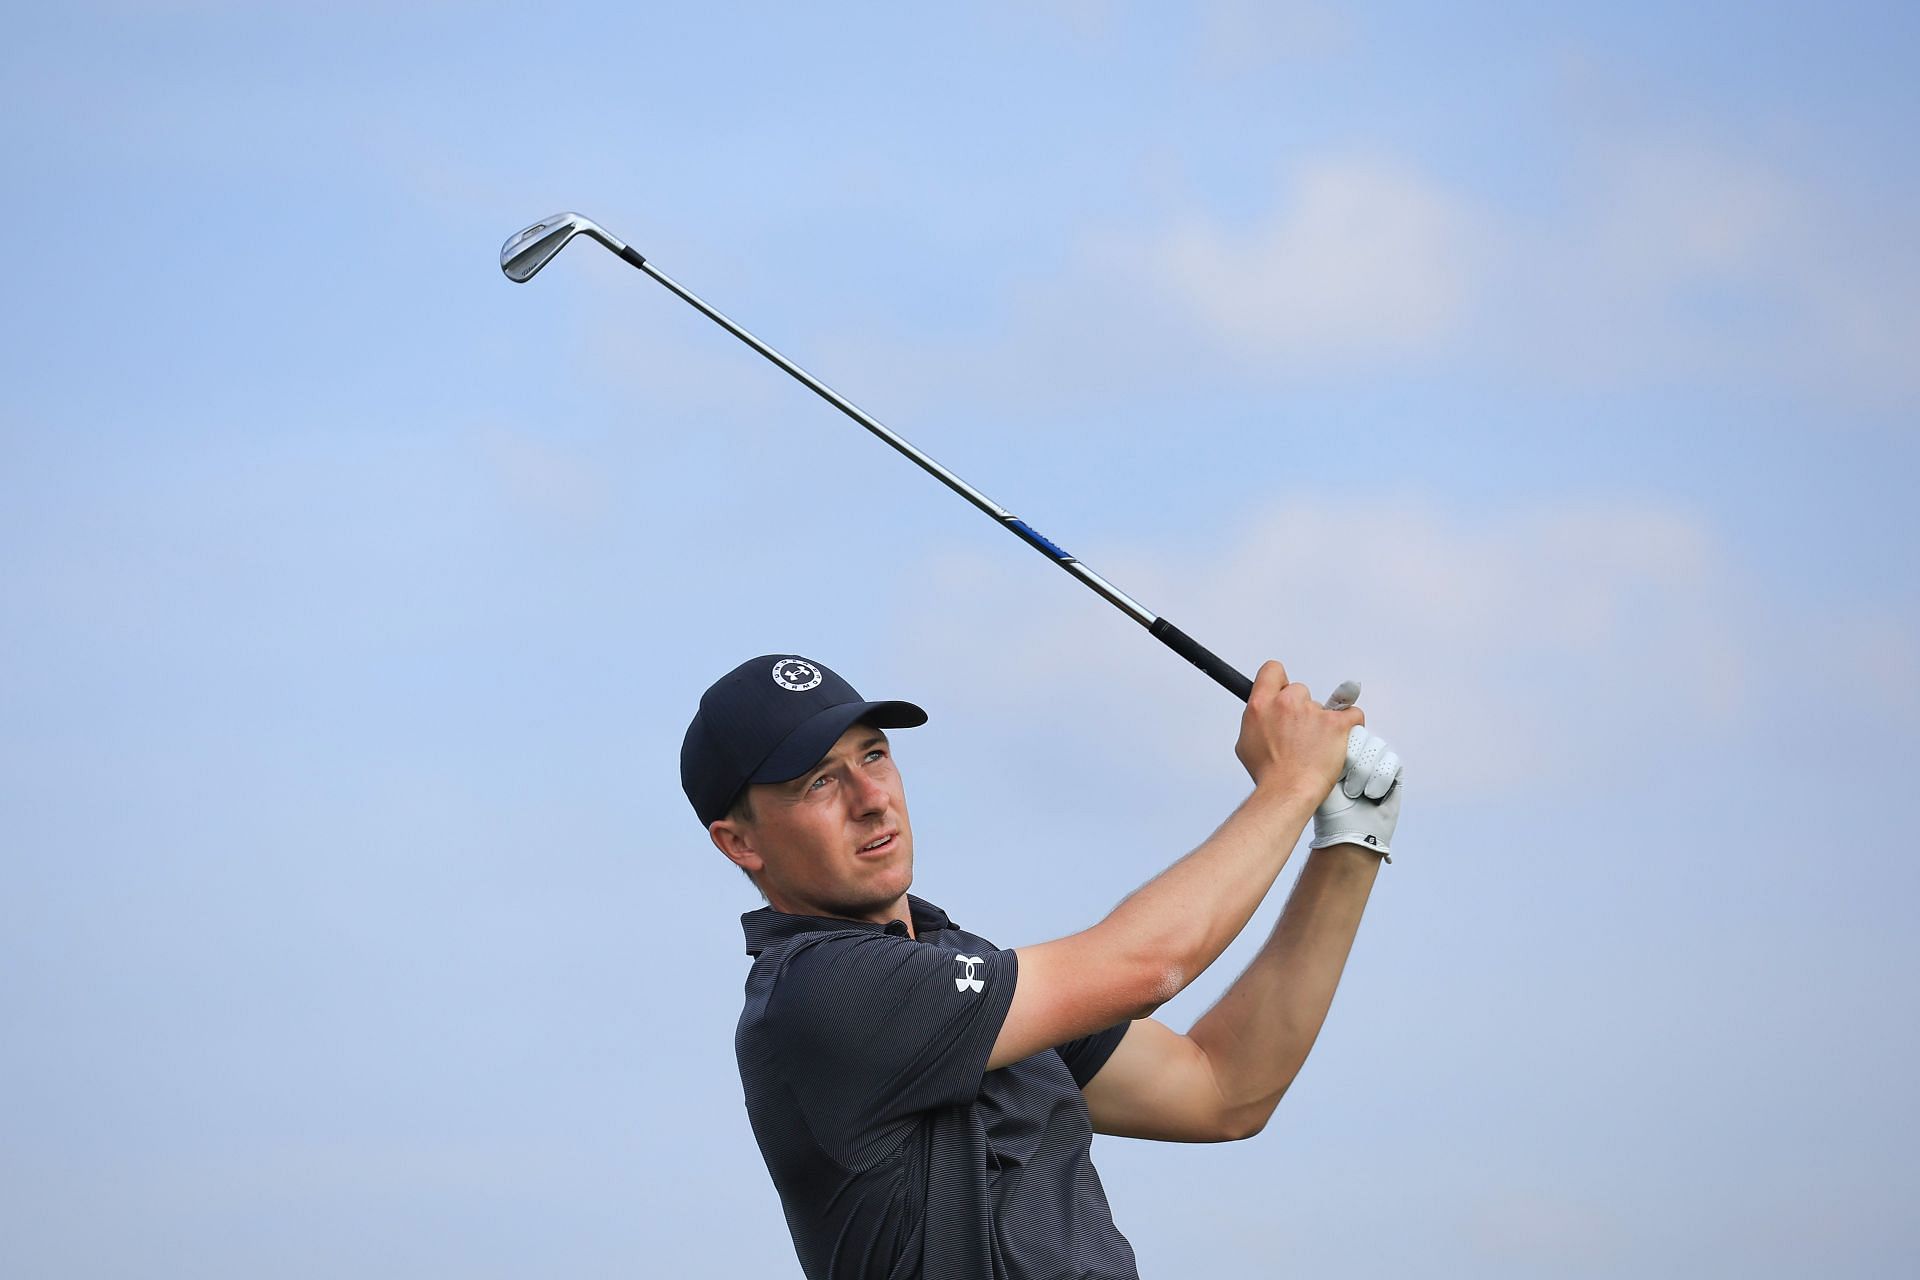 Jordan Spieth at the Arnold Palmer Invitational presented by Mastercard - Round Two (Image via Sam Greenwood/Getty Images)